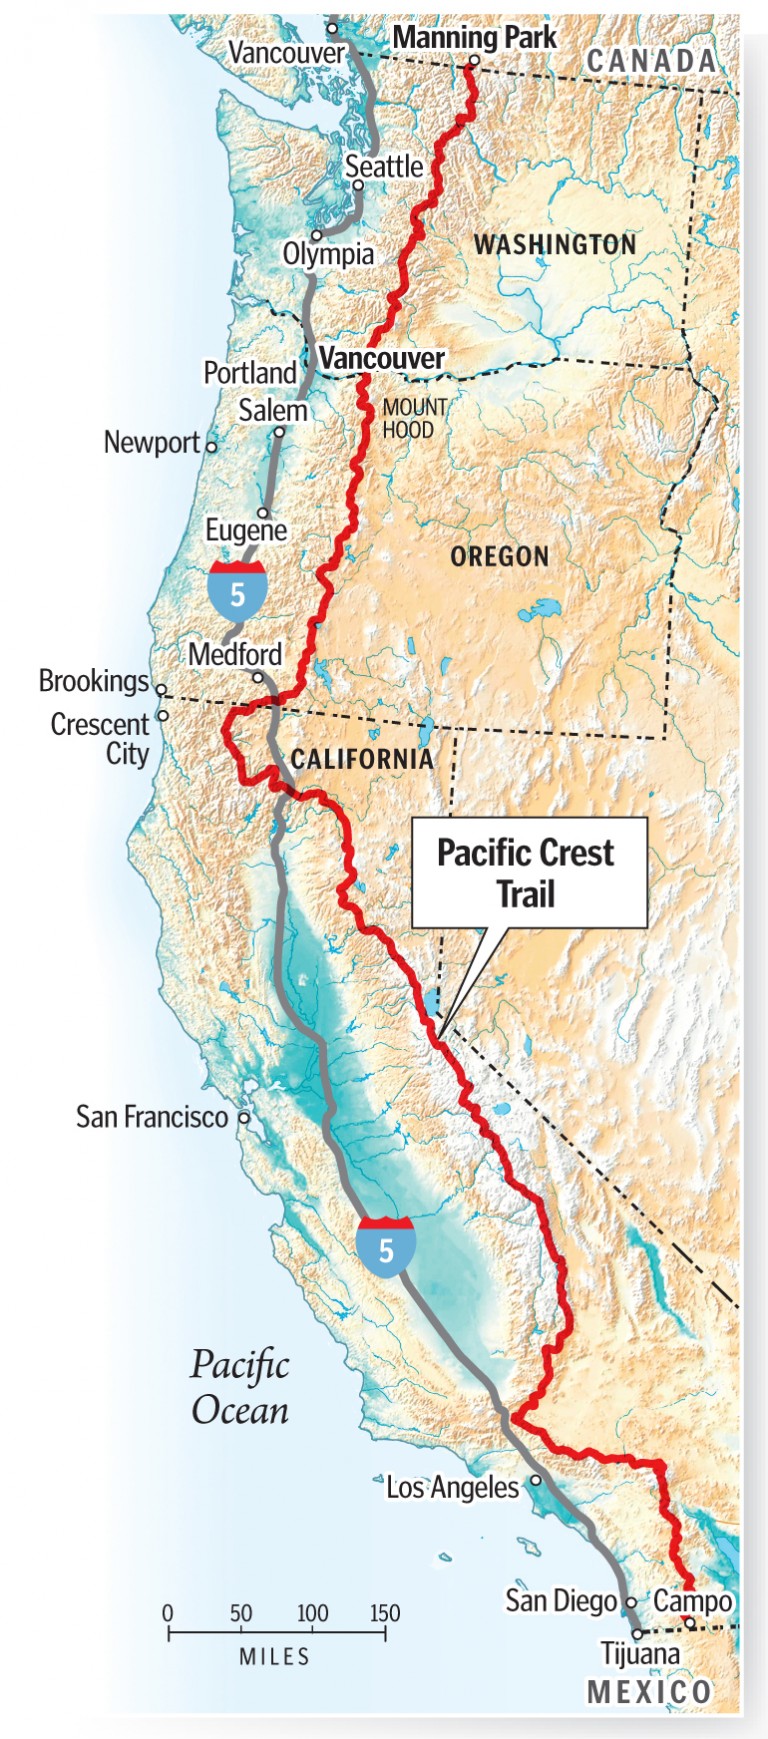 Walking the Pacific Crest Trail: Adventure of a Lifetime – Owen W. Knight – Author